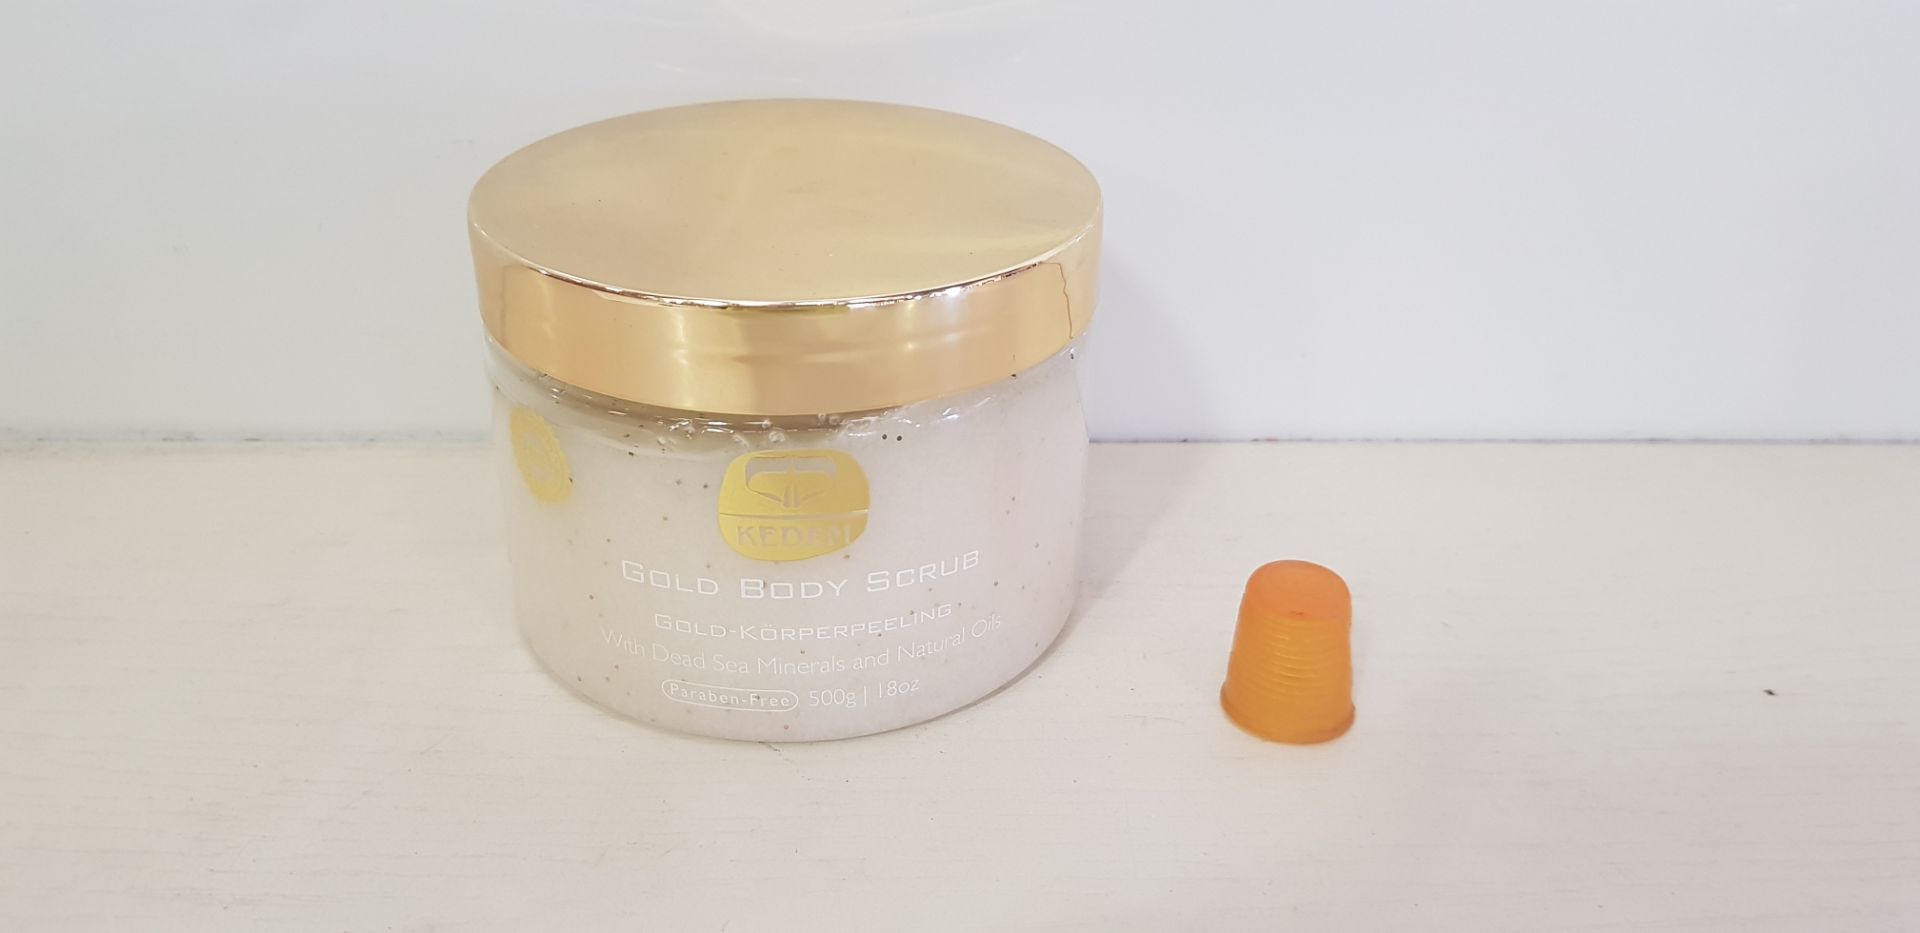 8 X BRAND NEW KEDMA GOLD BODY SCRUB - WITH DEAD SEA MINERAL & NATURAL OILS - 500G (PARABEN FREE)